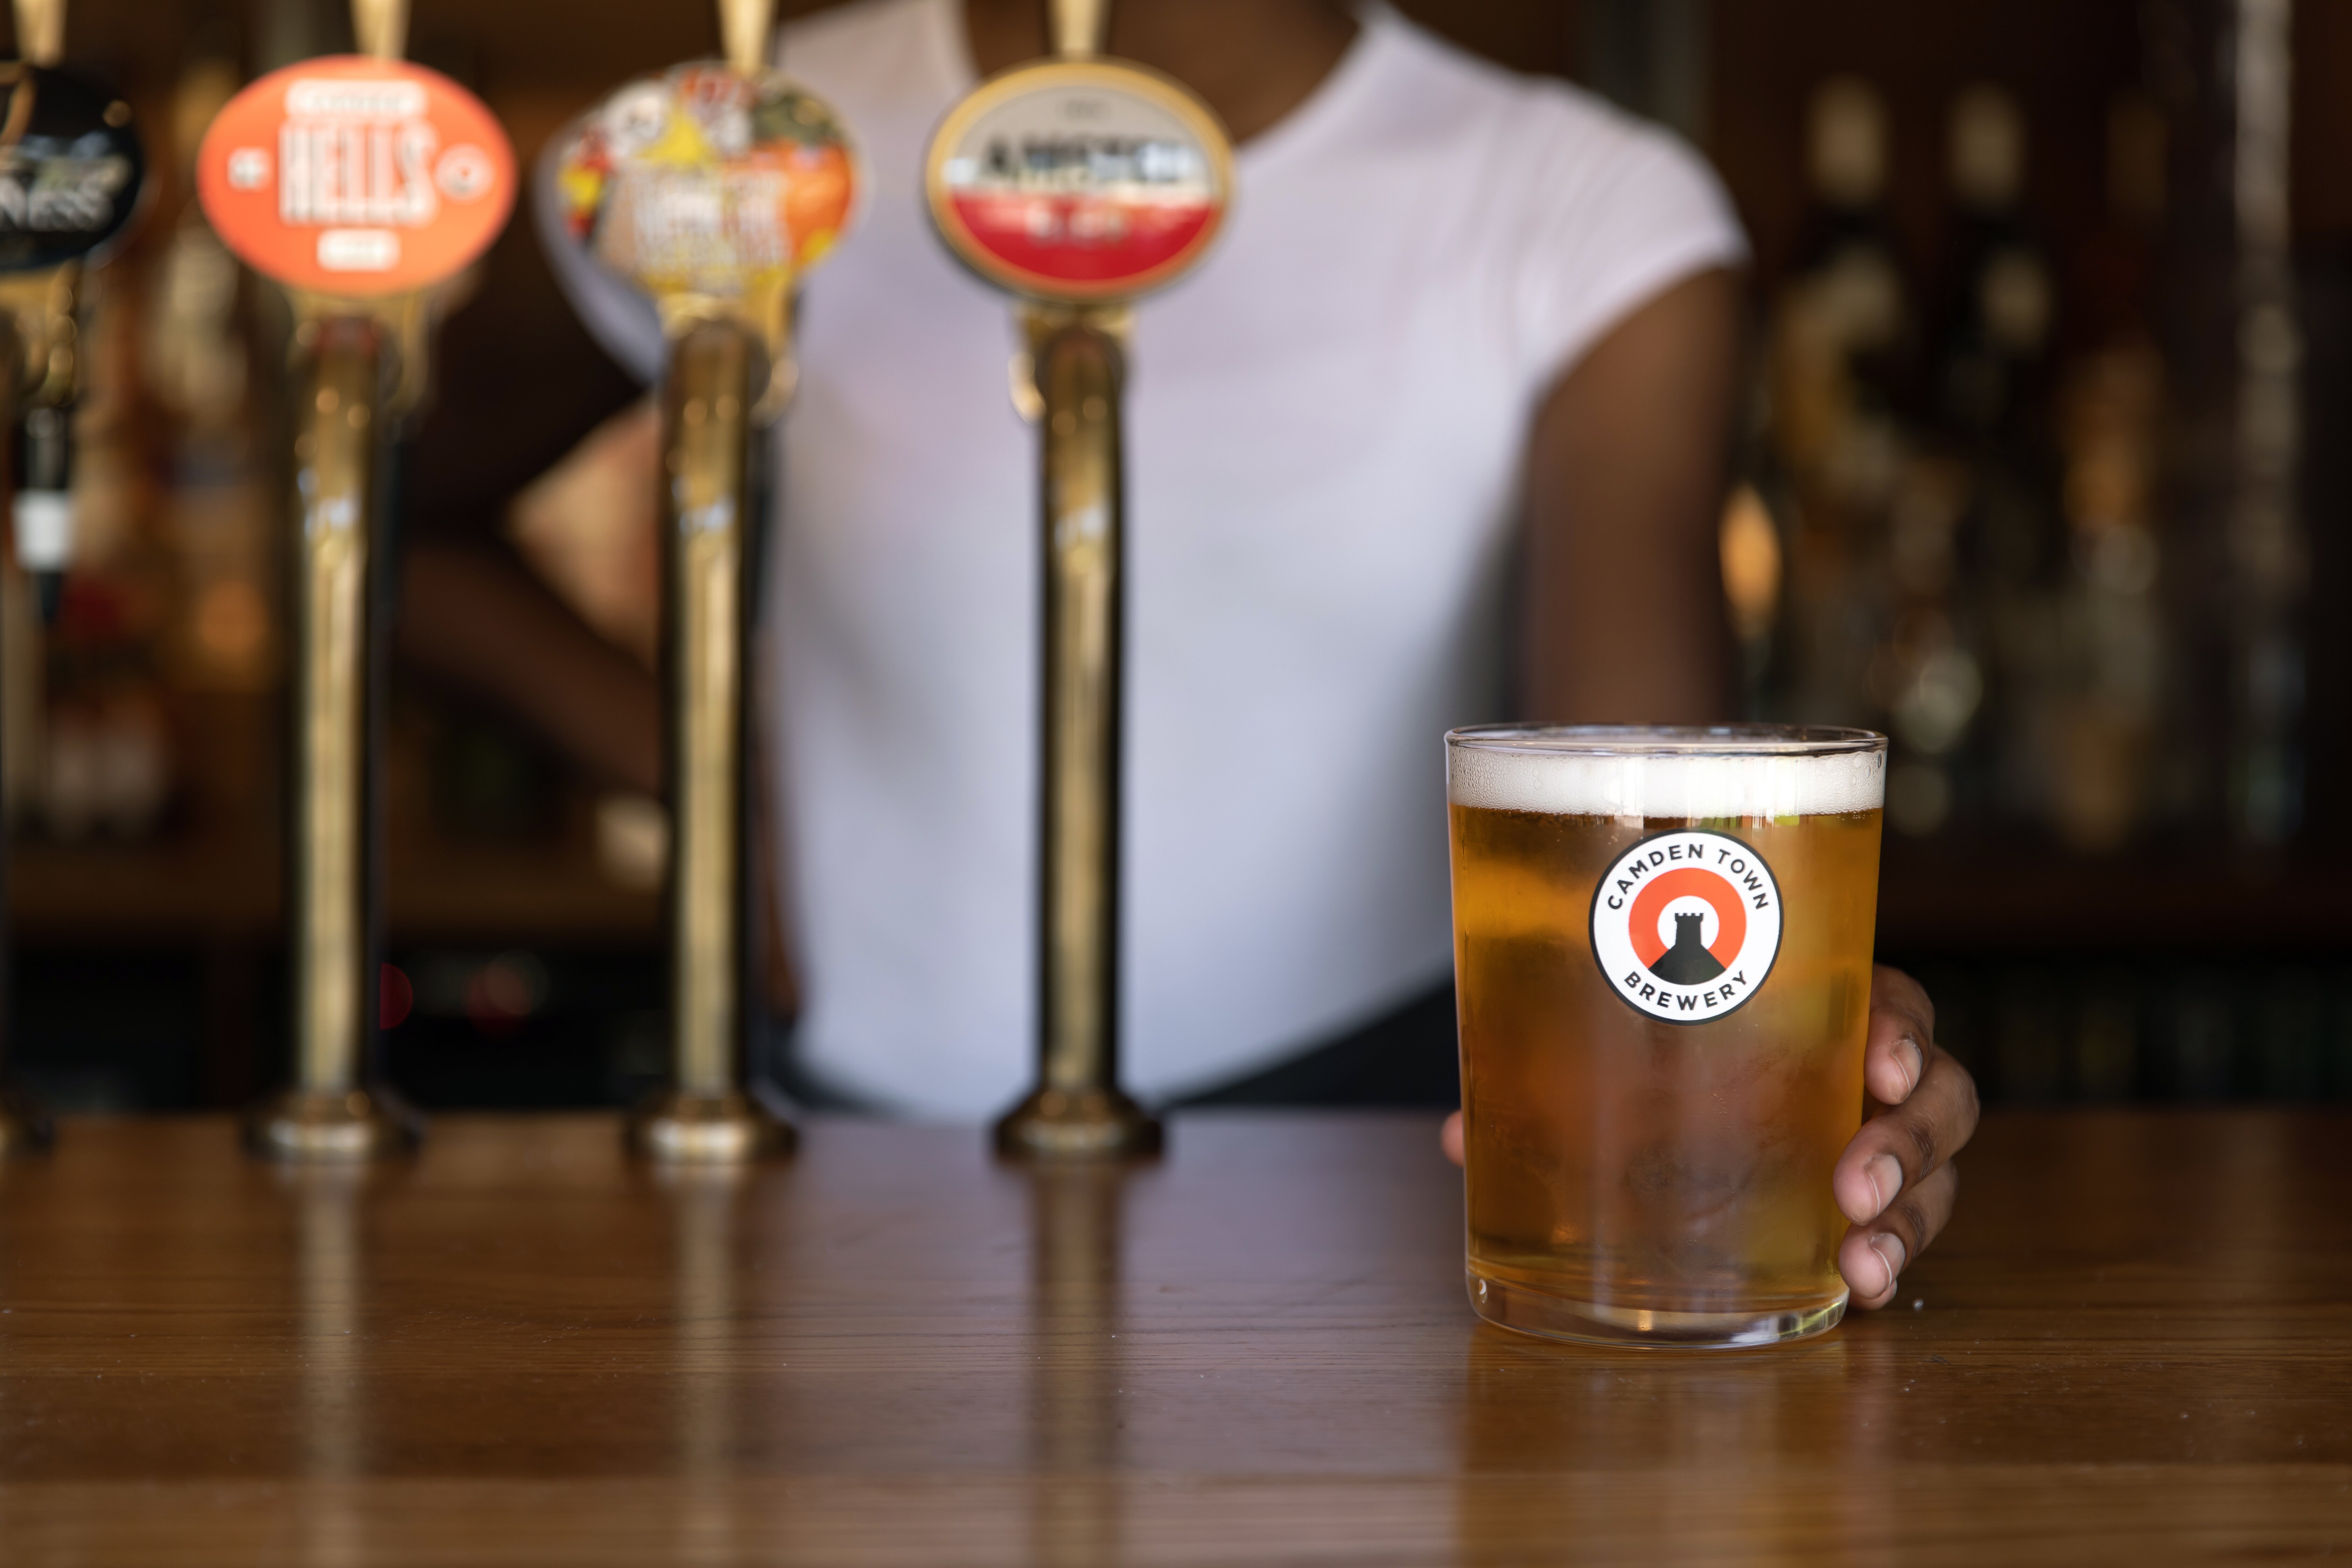 Last six months ‘one of the toughest periods’ for Young’s as pub group swings to £21.8m loss